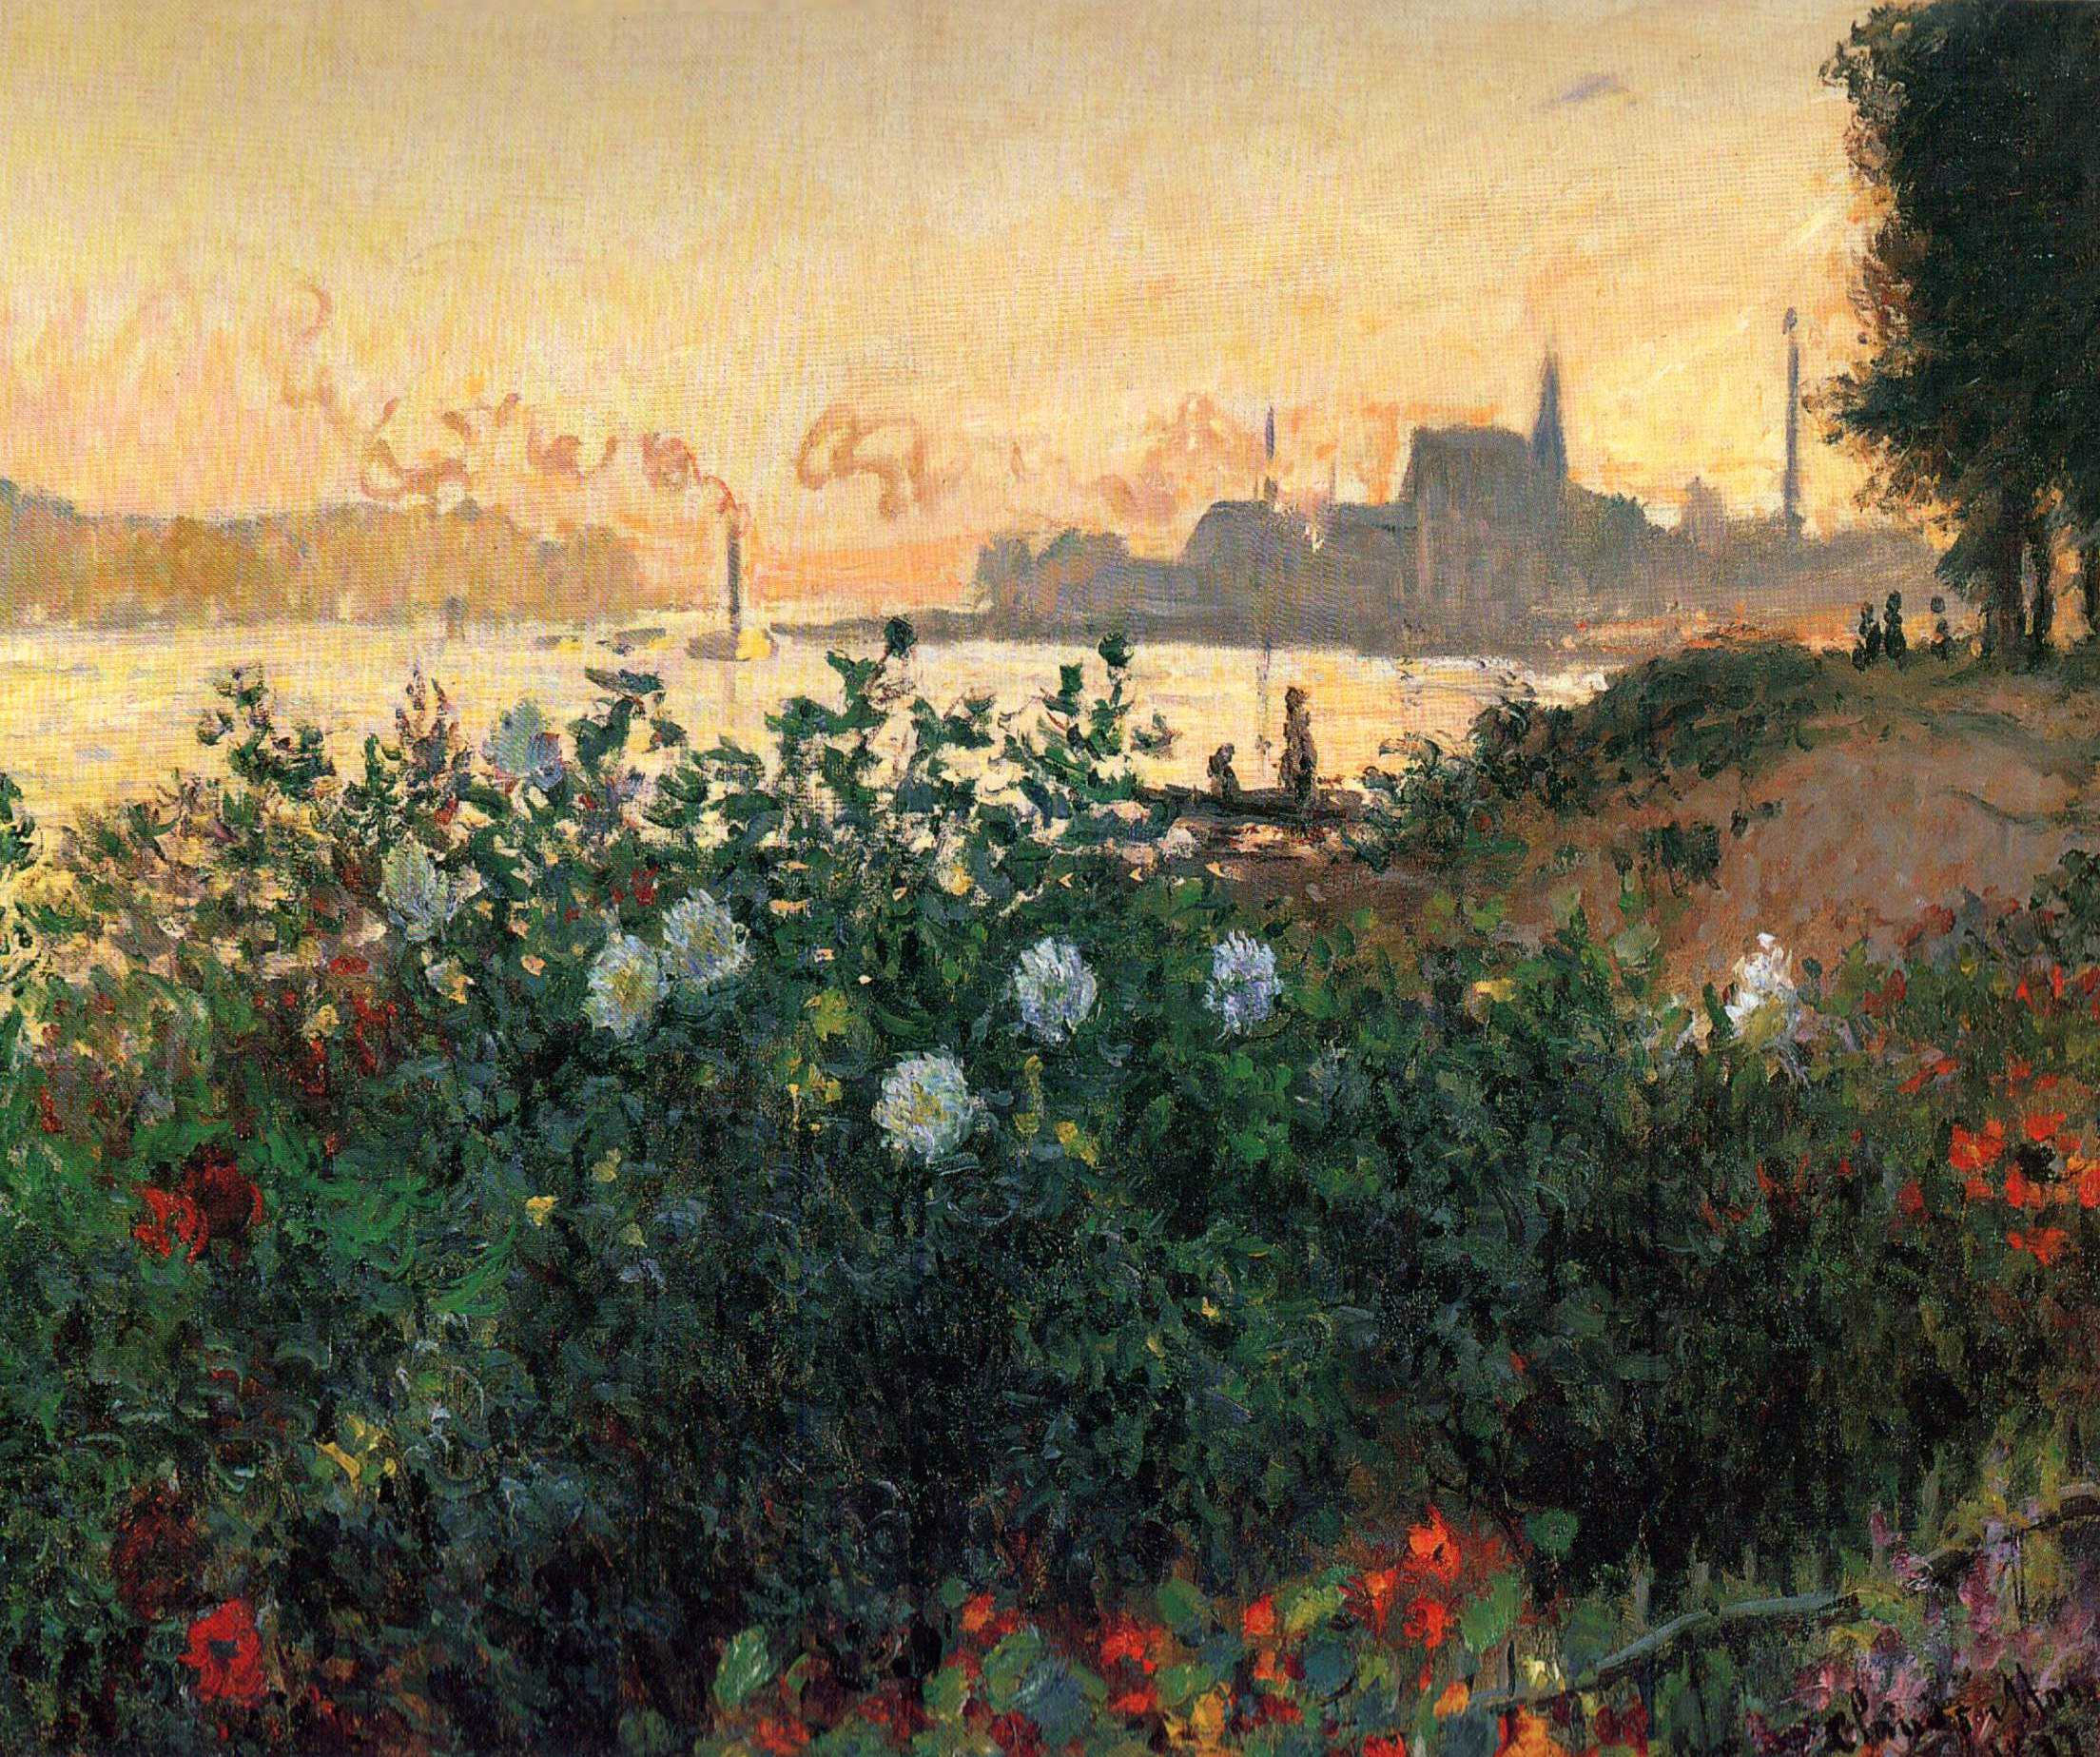 Flowers on the Riverbank at Argenteuil by Claude Monet - 1877 - - Pola Museum of Art